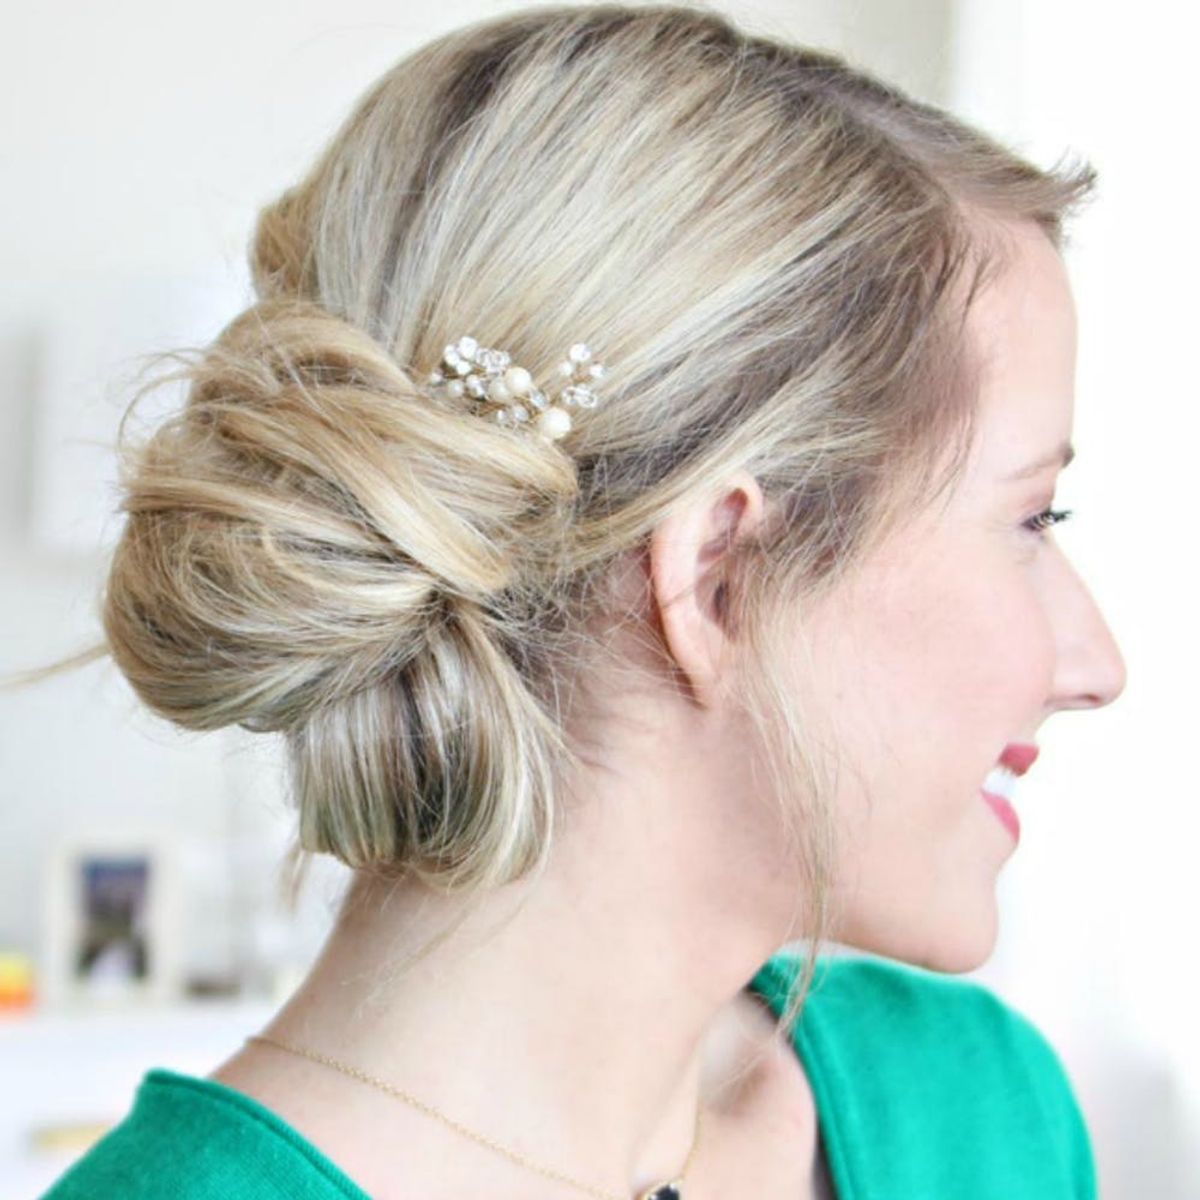 Twist Hairstyles Are the Perfect Special-Occasion ‘Do